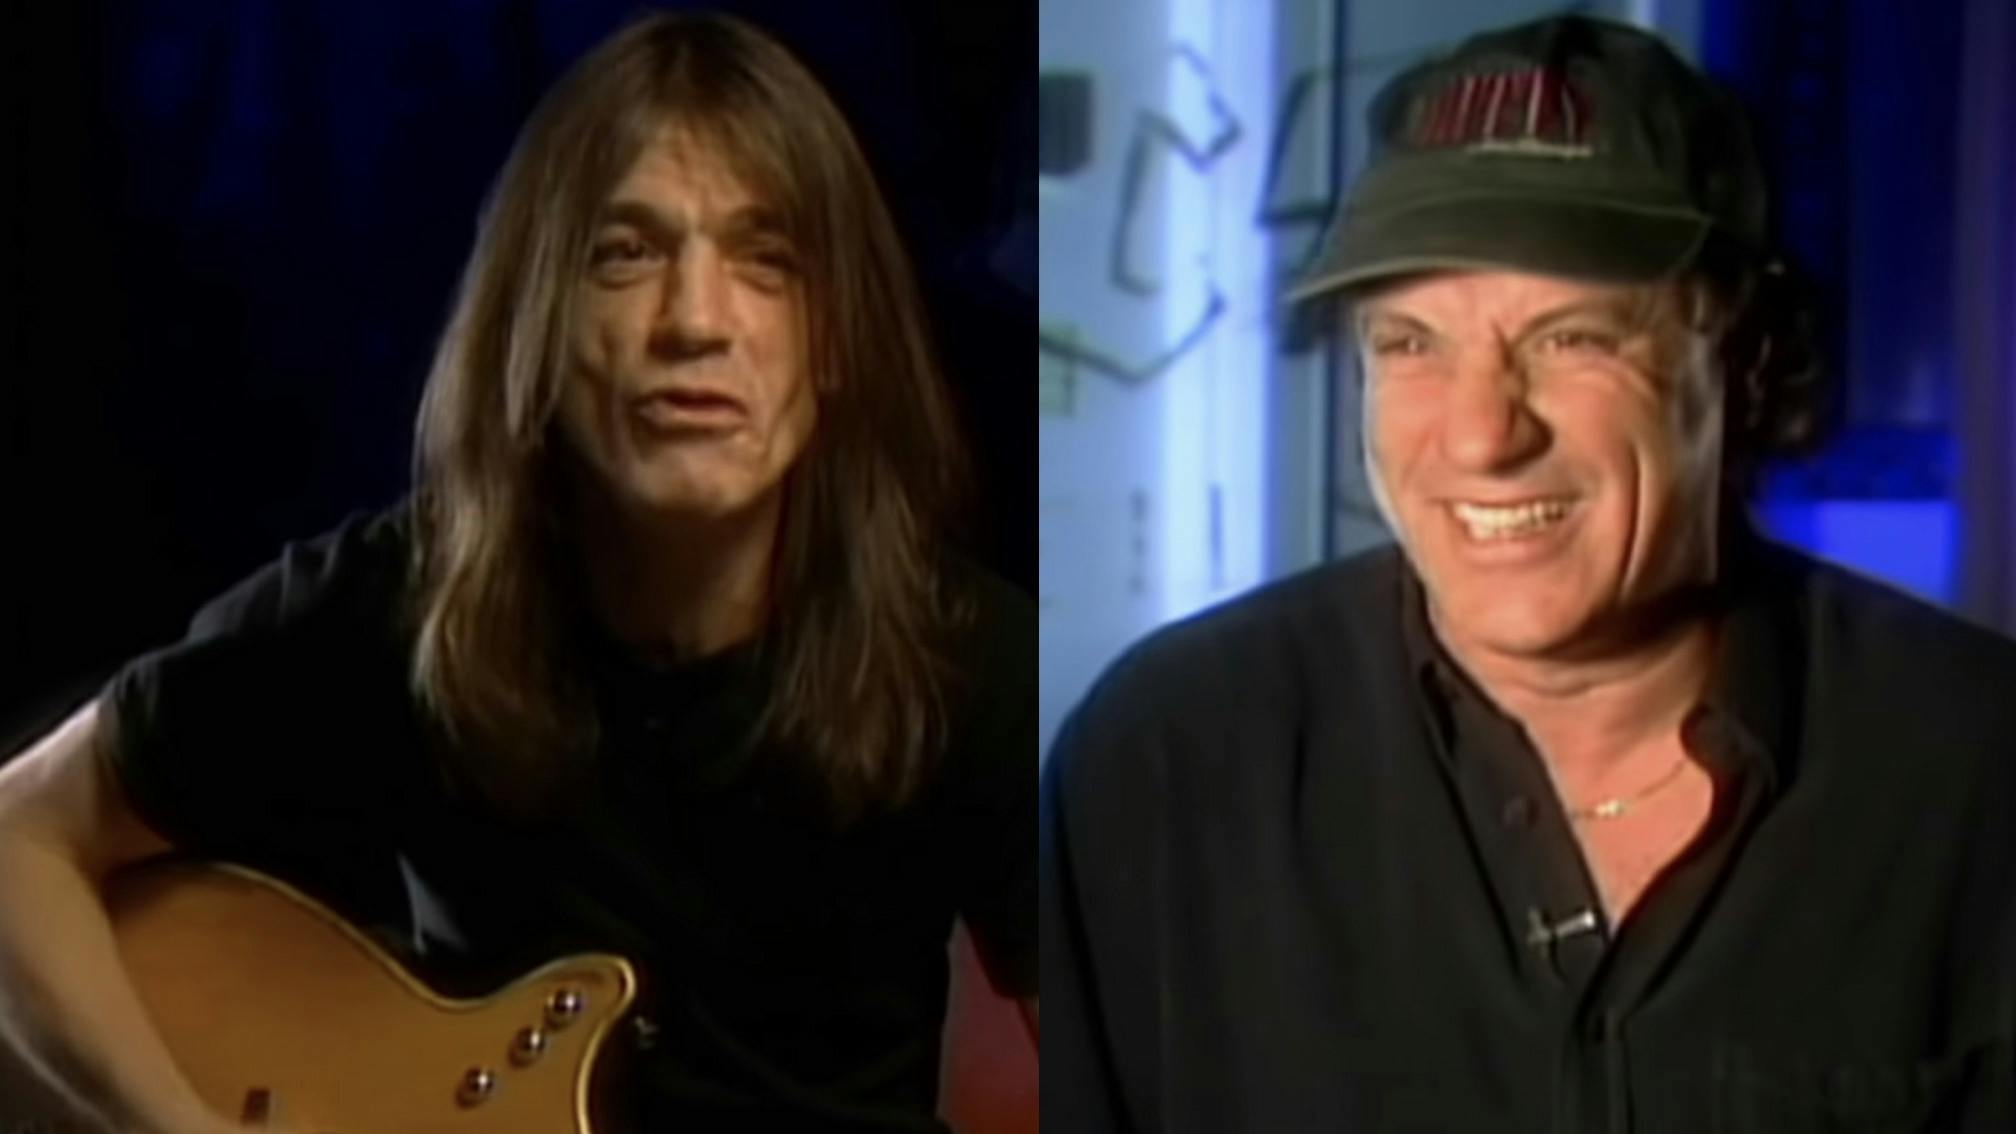 Watch AC/DC Tell The Story Of Back In Black In Previously Unseen Documentary Footage